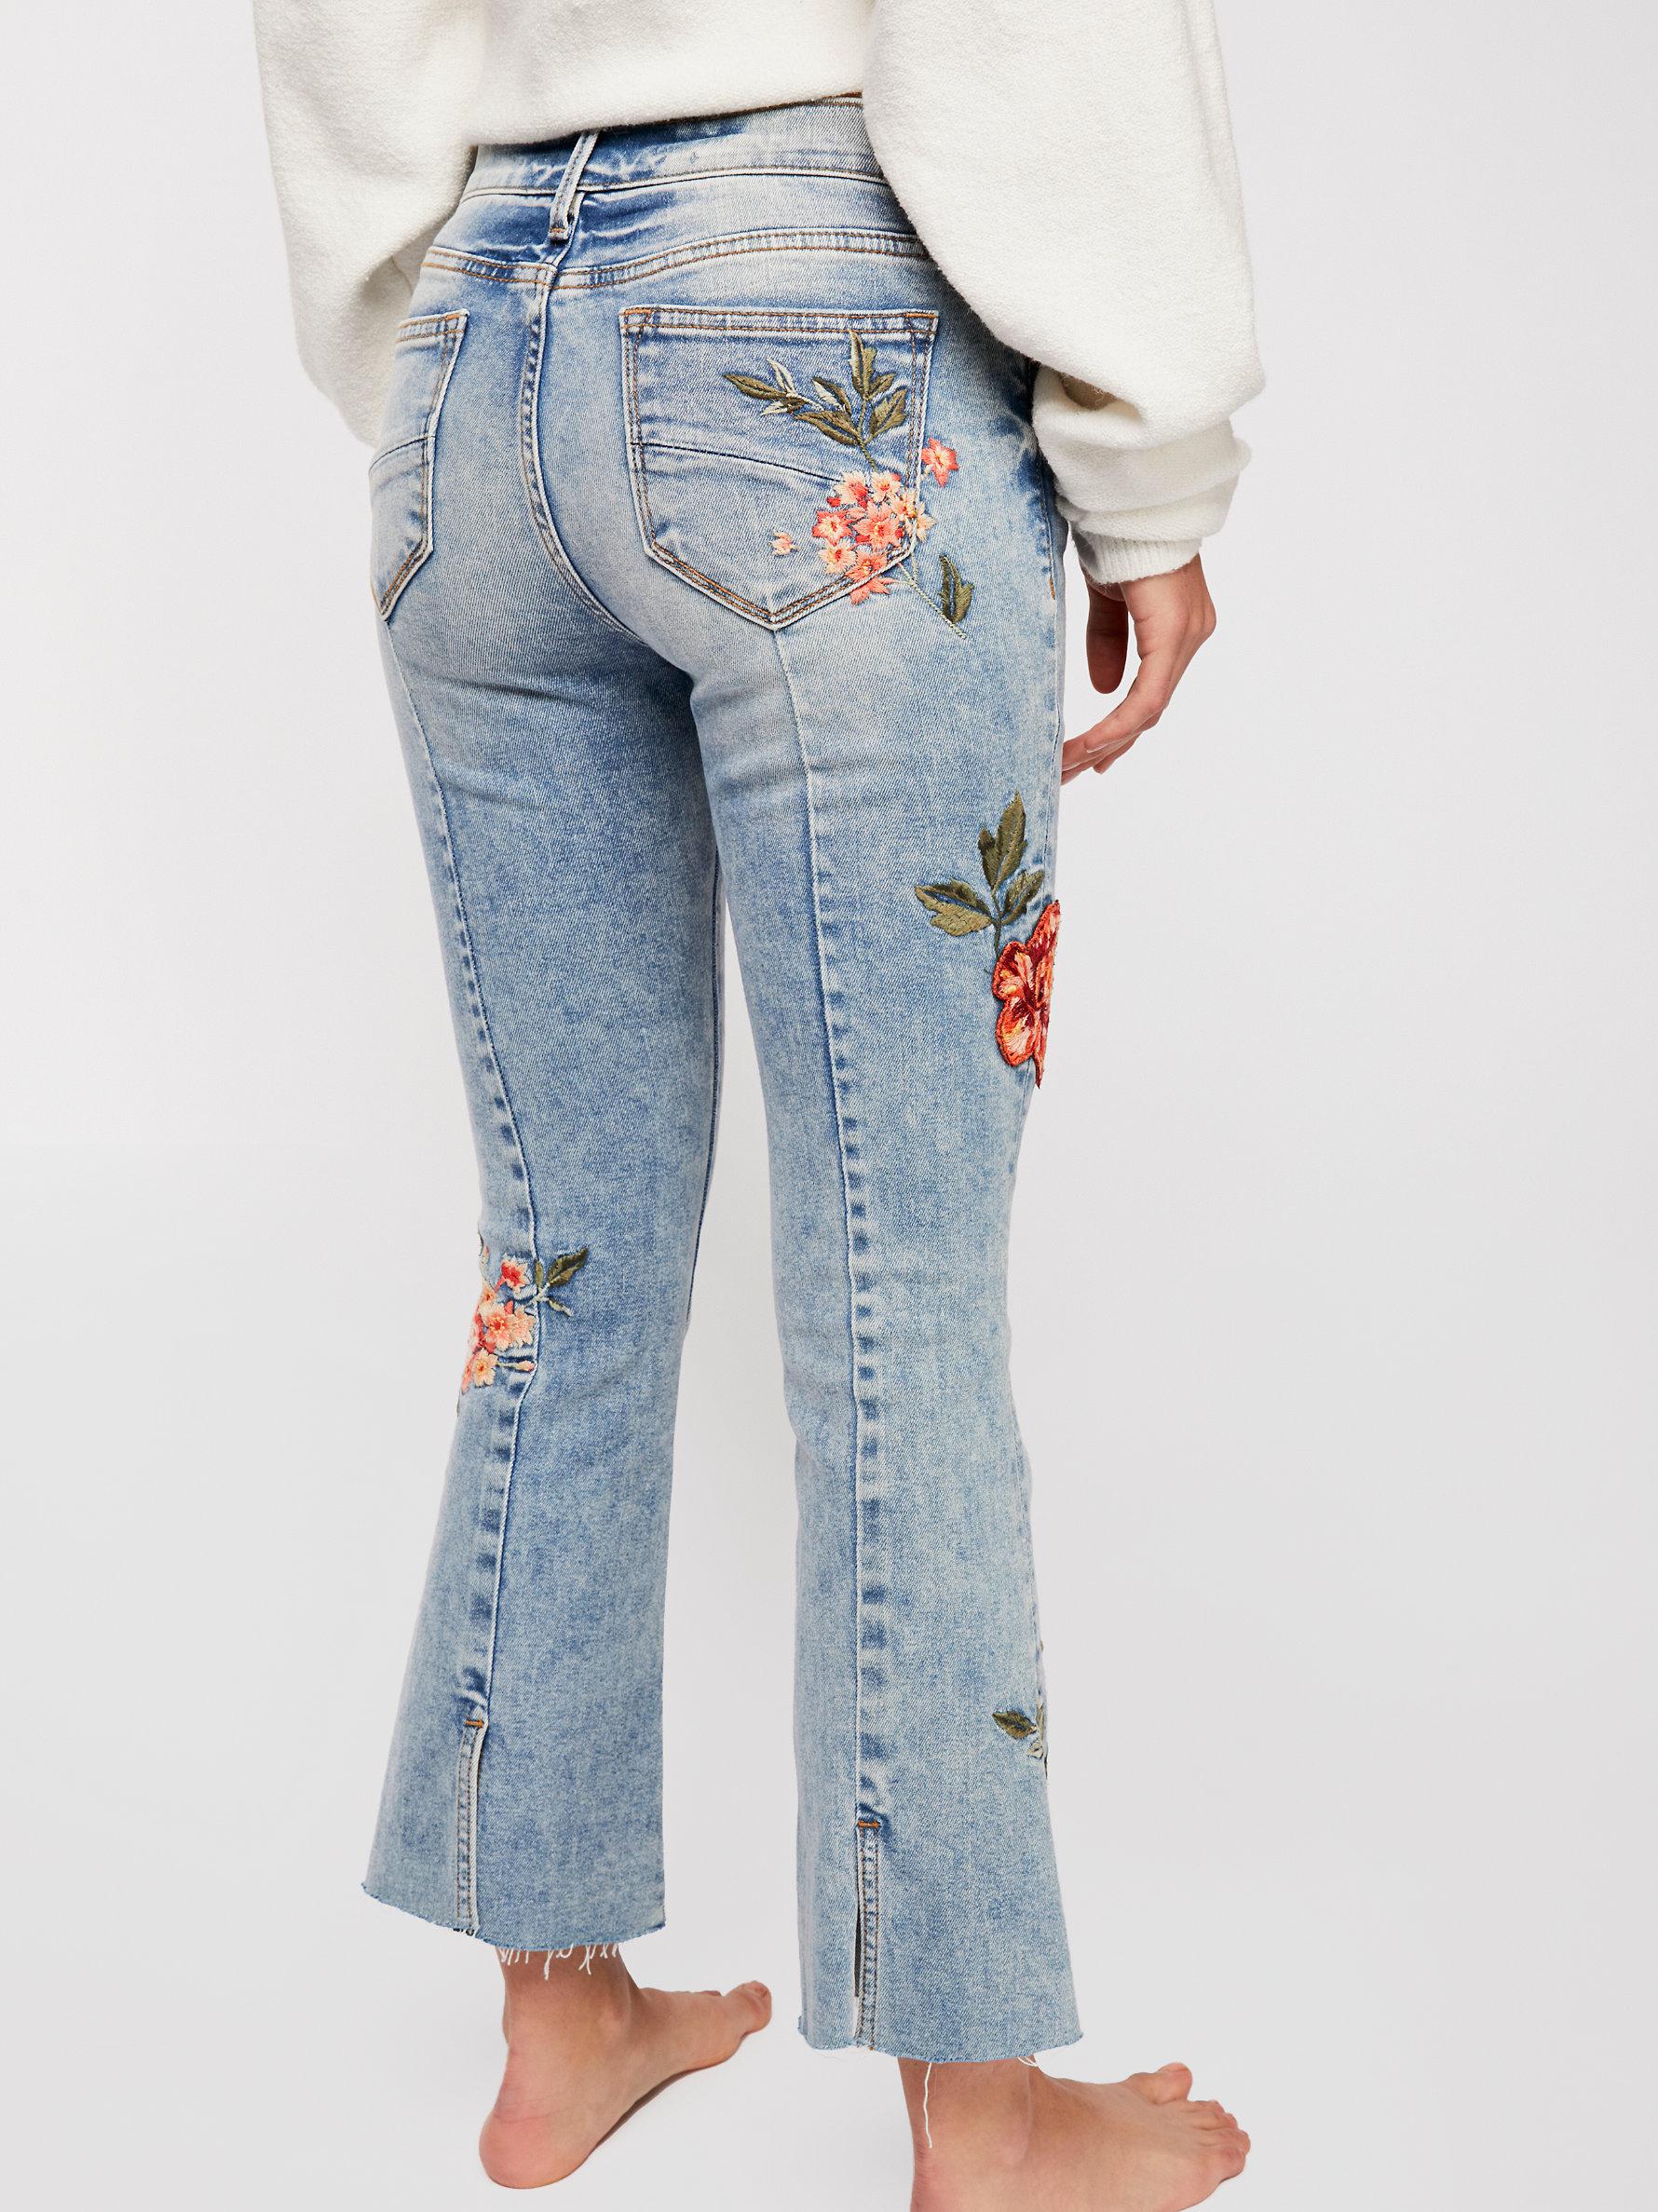 DRIFTWOOD ROXY FLARE CROP BERRIES EMBROIDERED JEANS - cafebleu.verse.jp